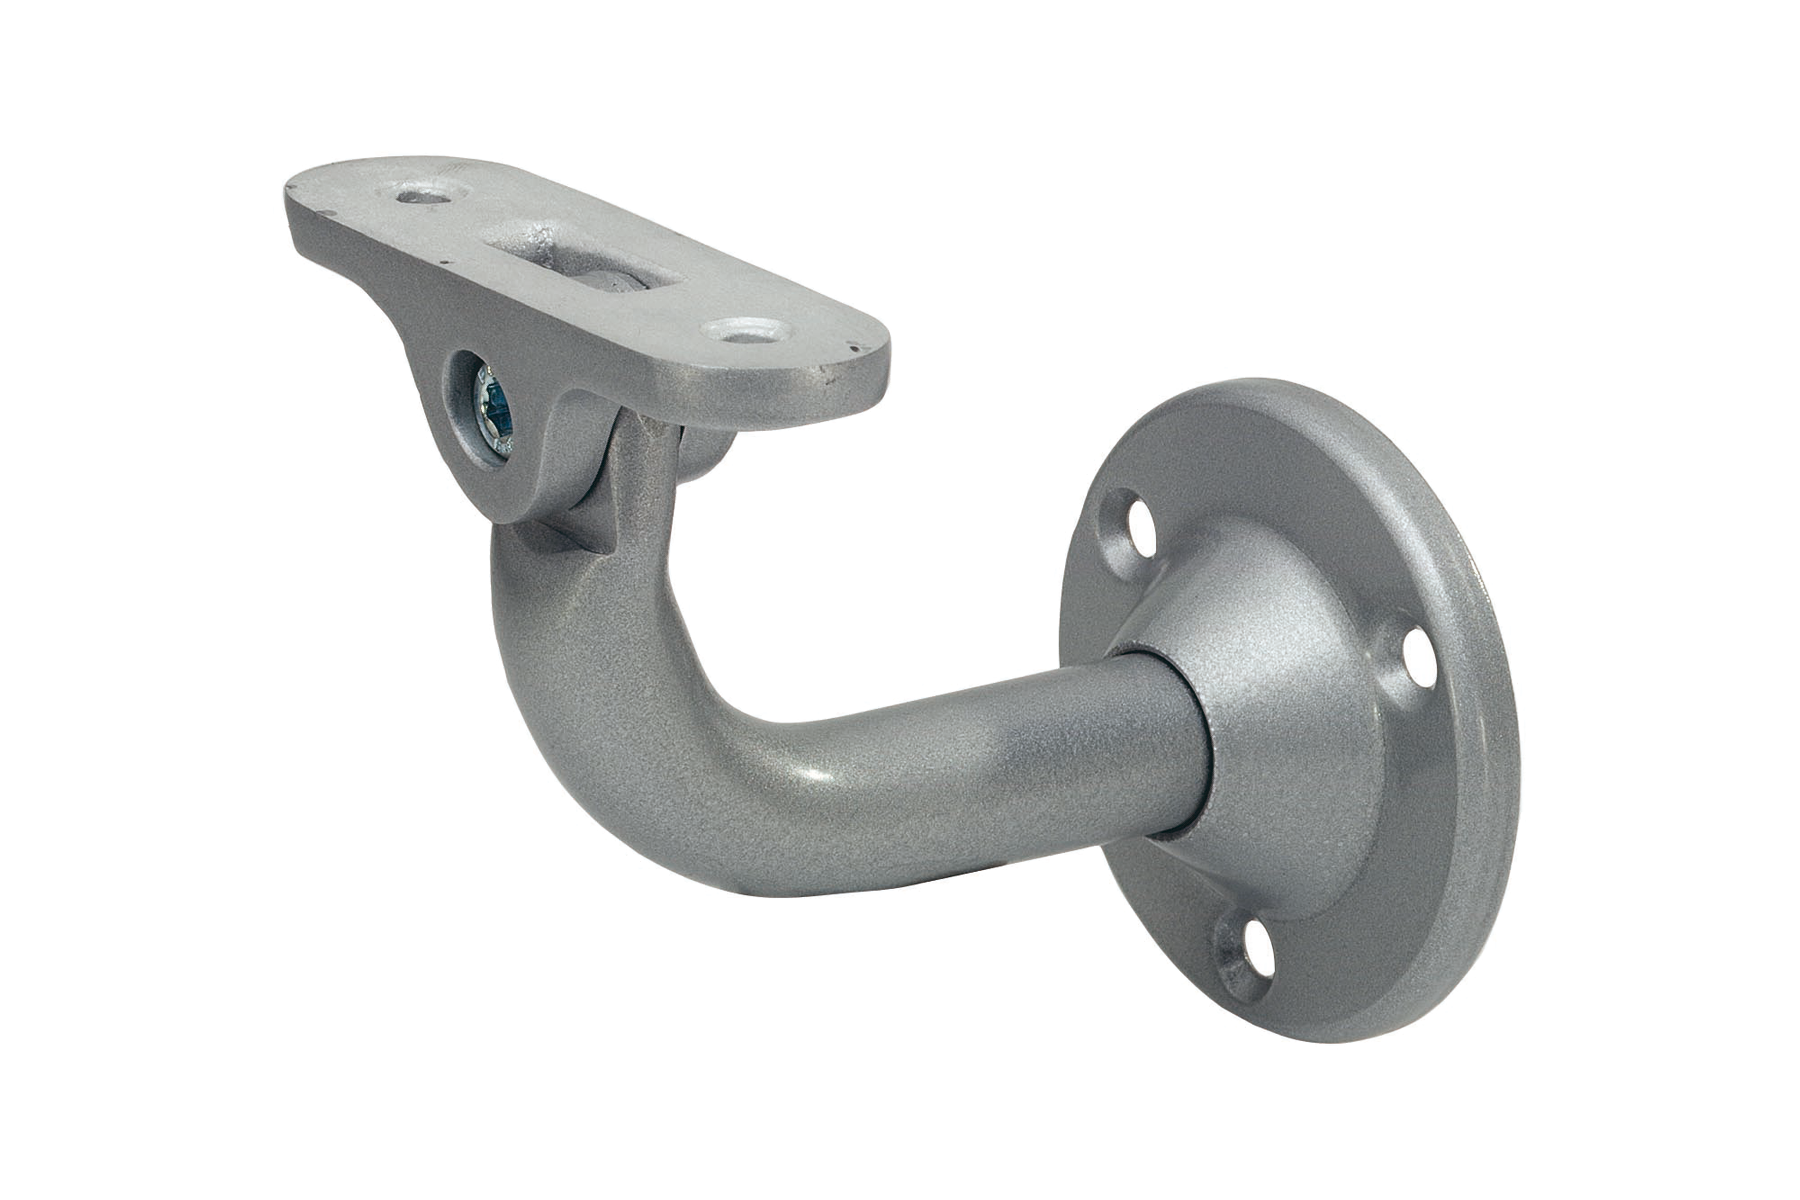 KWS Handrail support 4514 in finish 02 (steel, silver stove-enamelled)